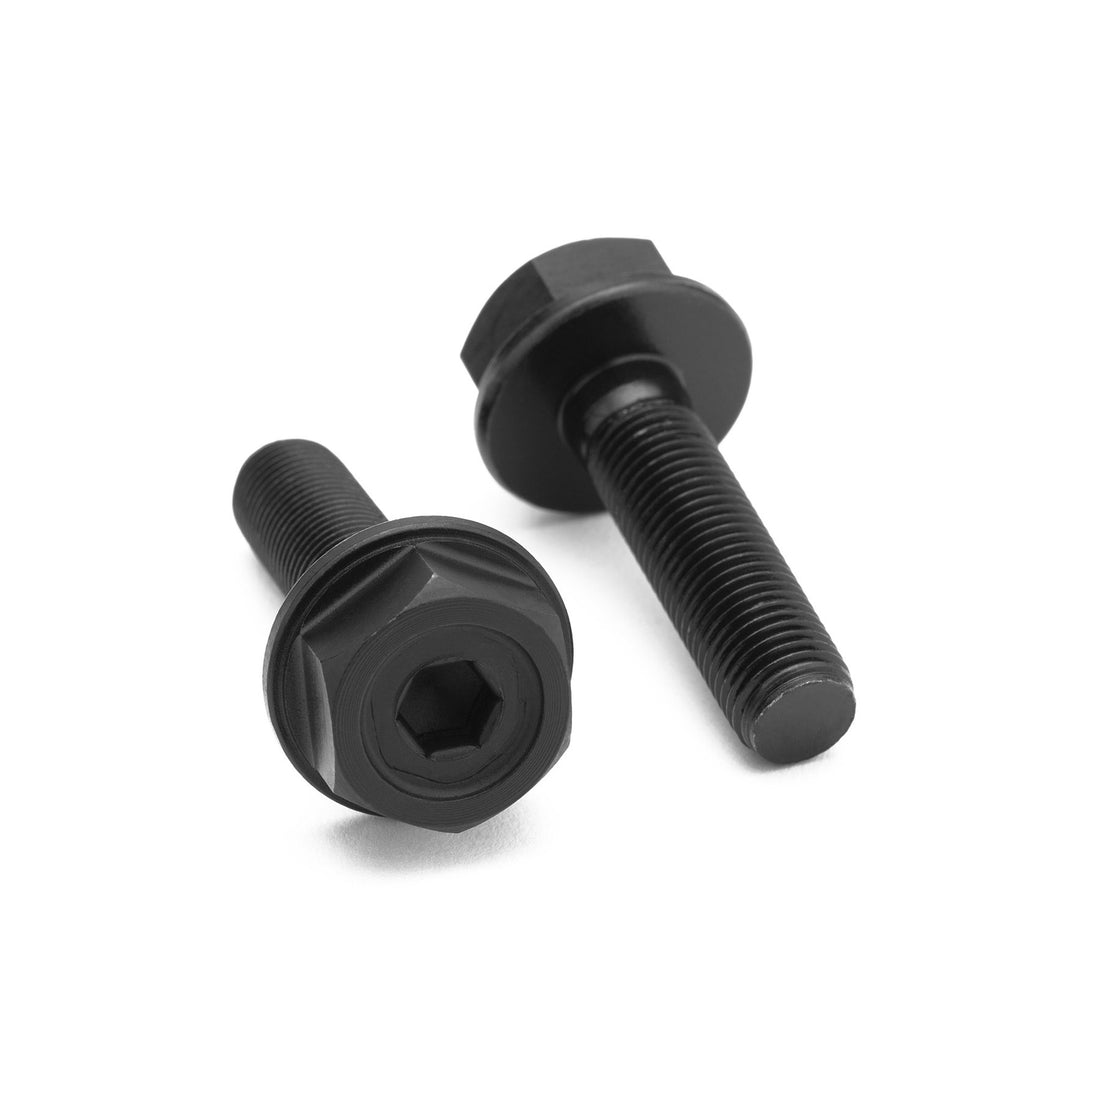 Cinema|FX FRONT BOLTS |Cycle LM (4550129254493)